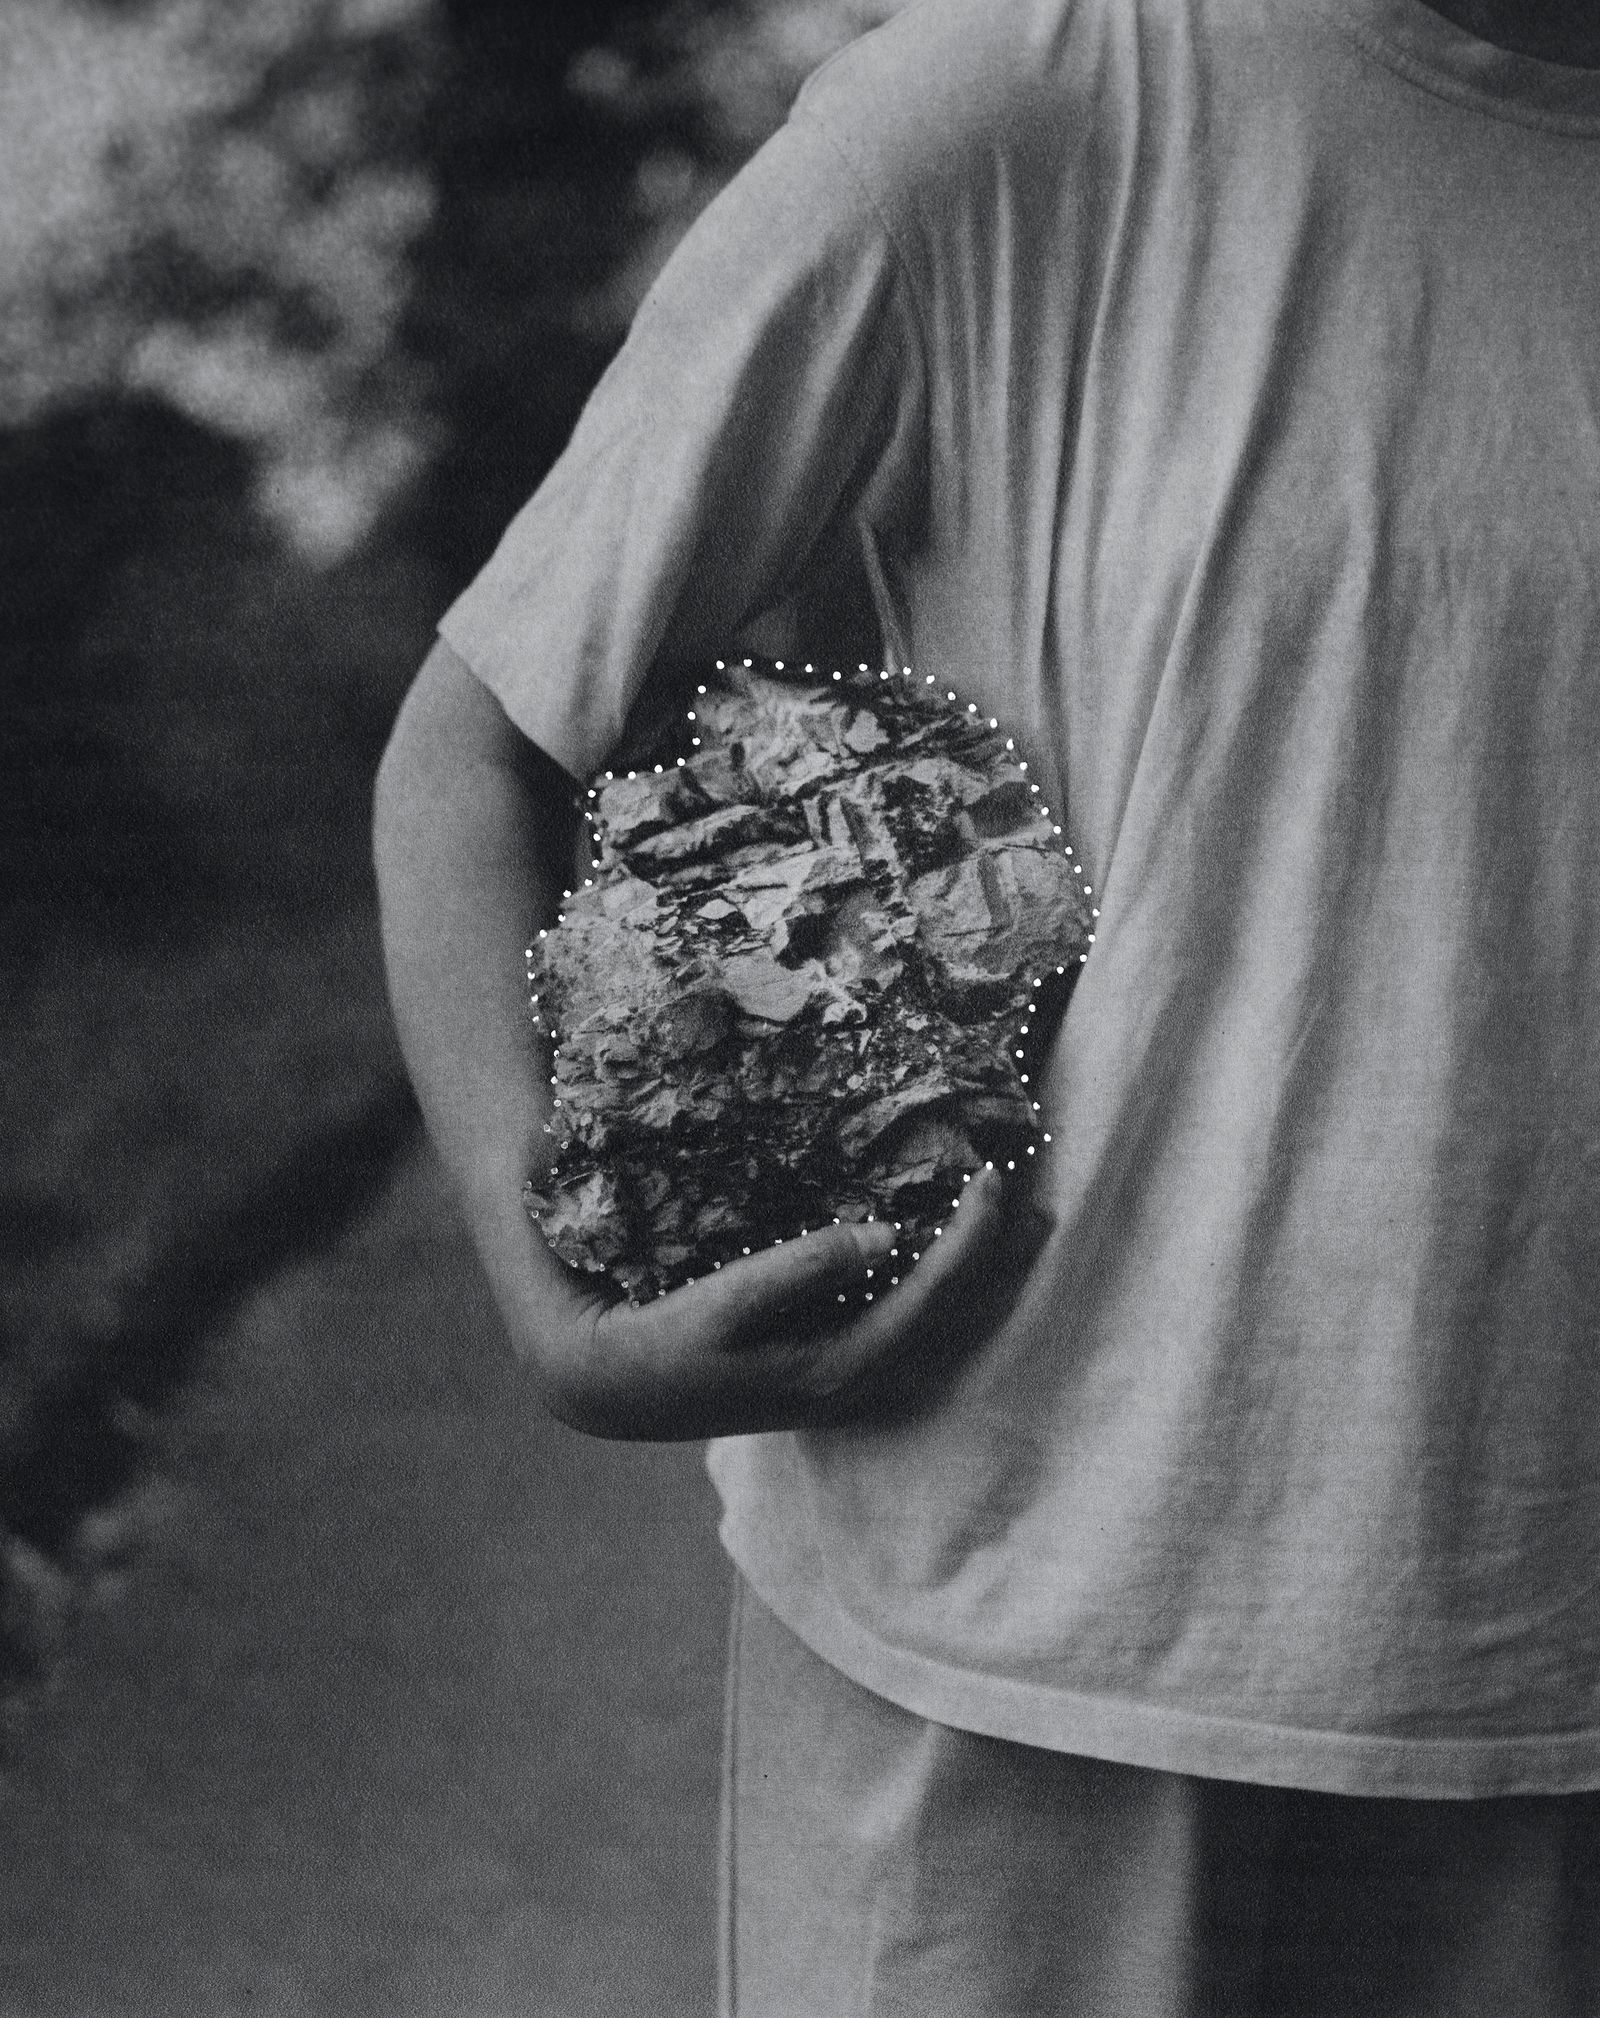 © Emilia Martin - Image from the I Saw A Tree Bearing Stones In A Place Of Apples And Pears photography project